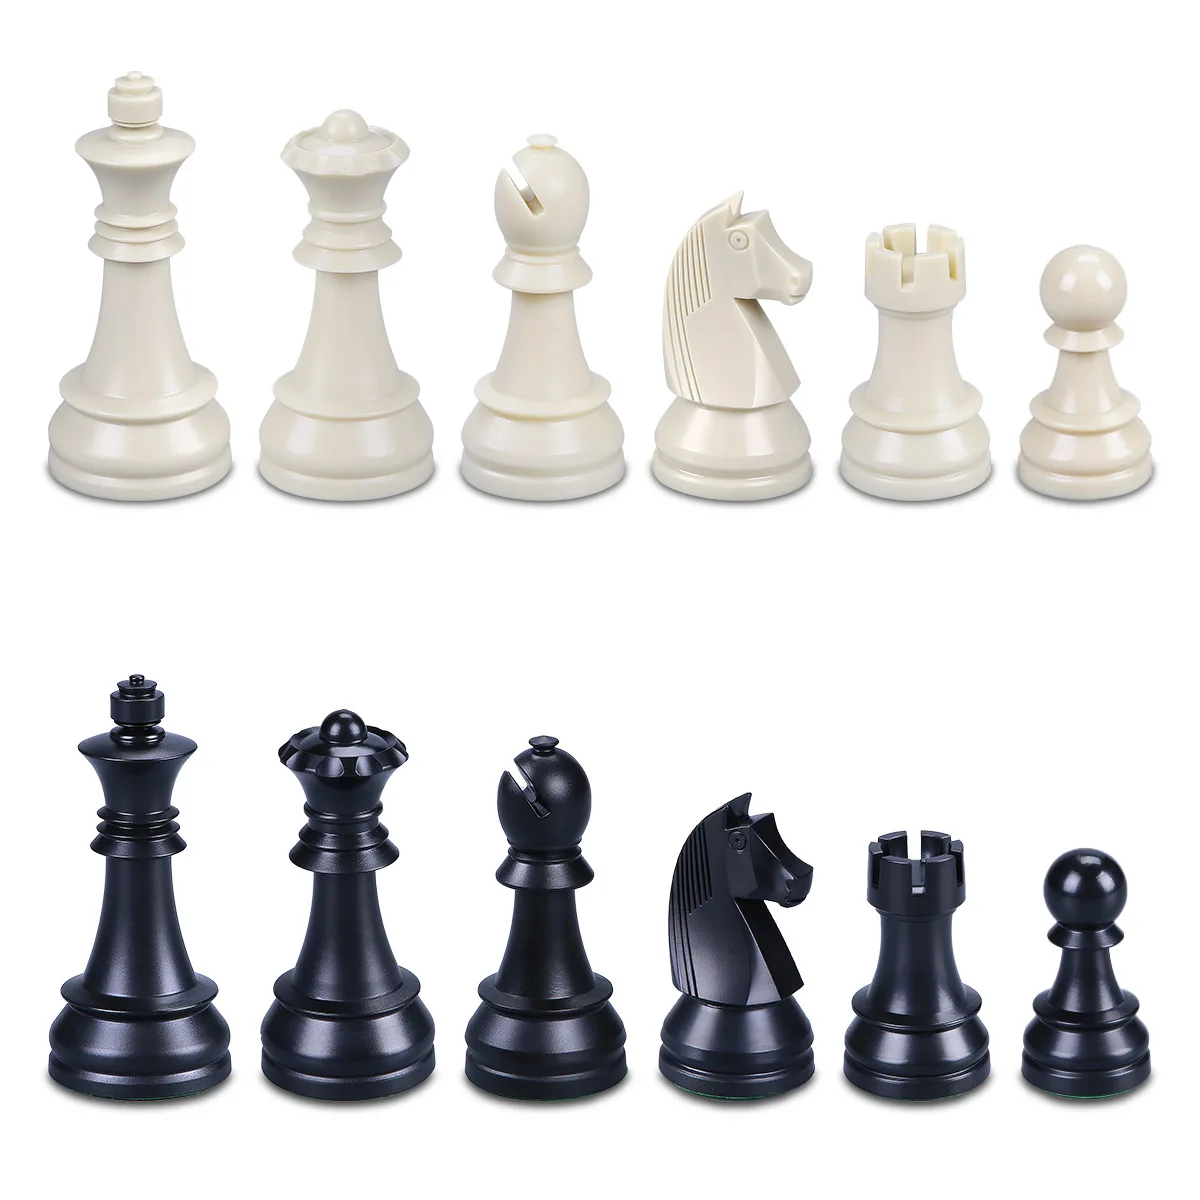 

High quality ABS chess pieces sets for indoor chess game, White/black